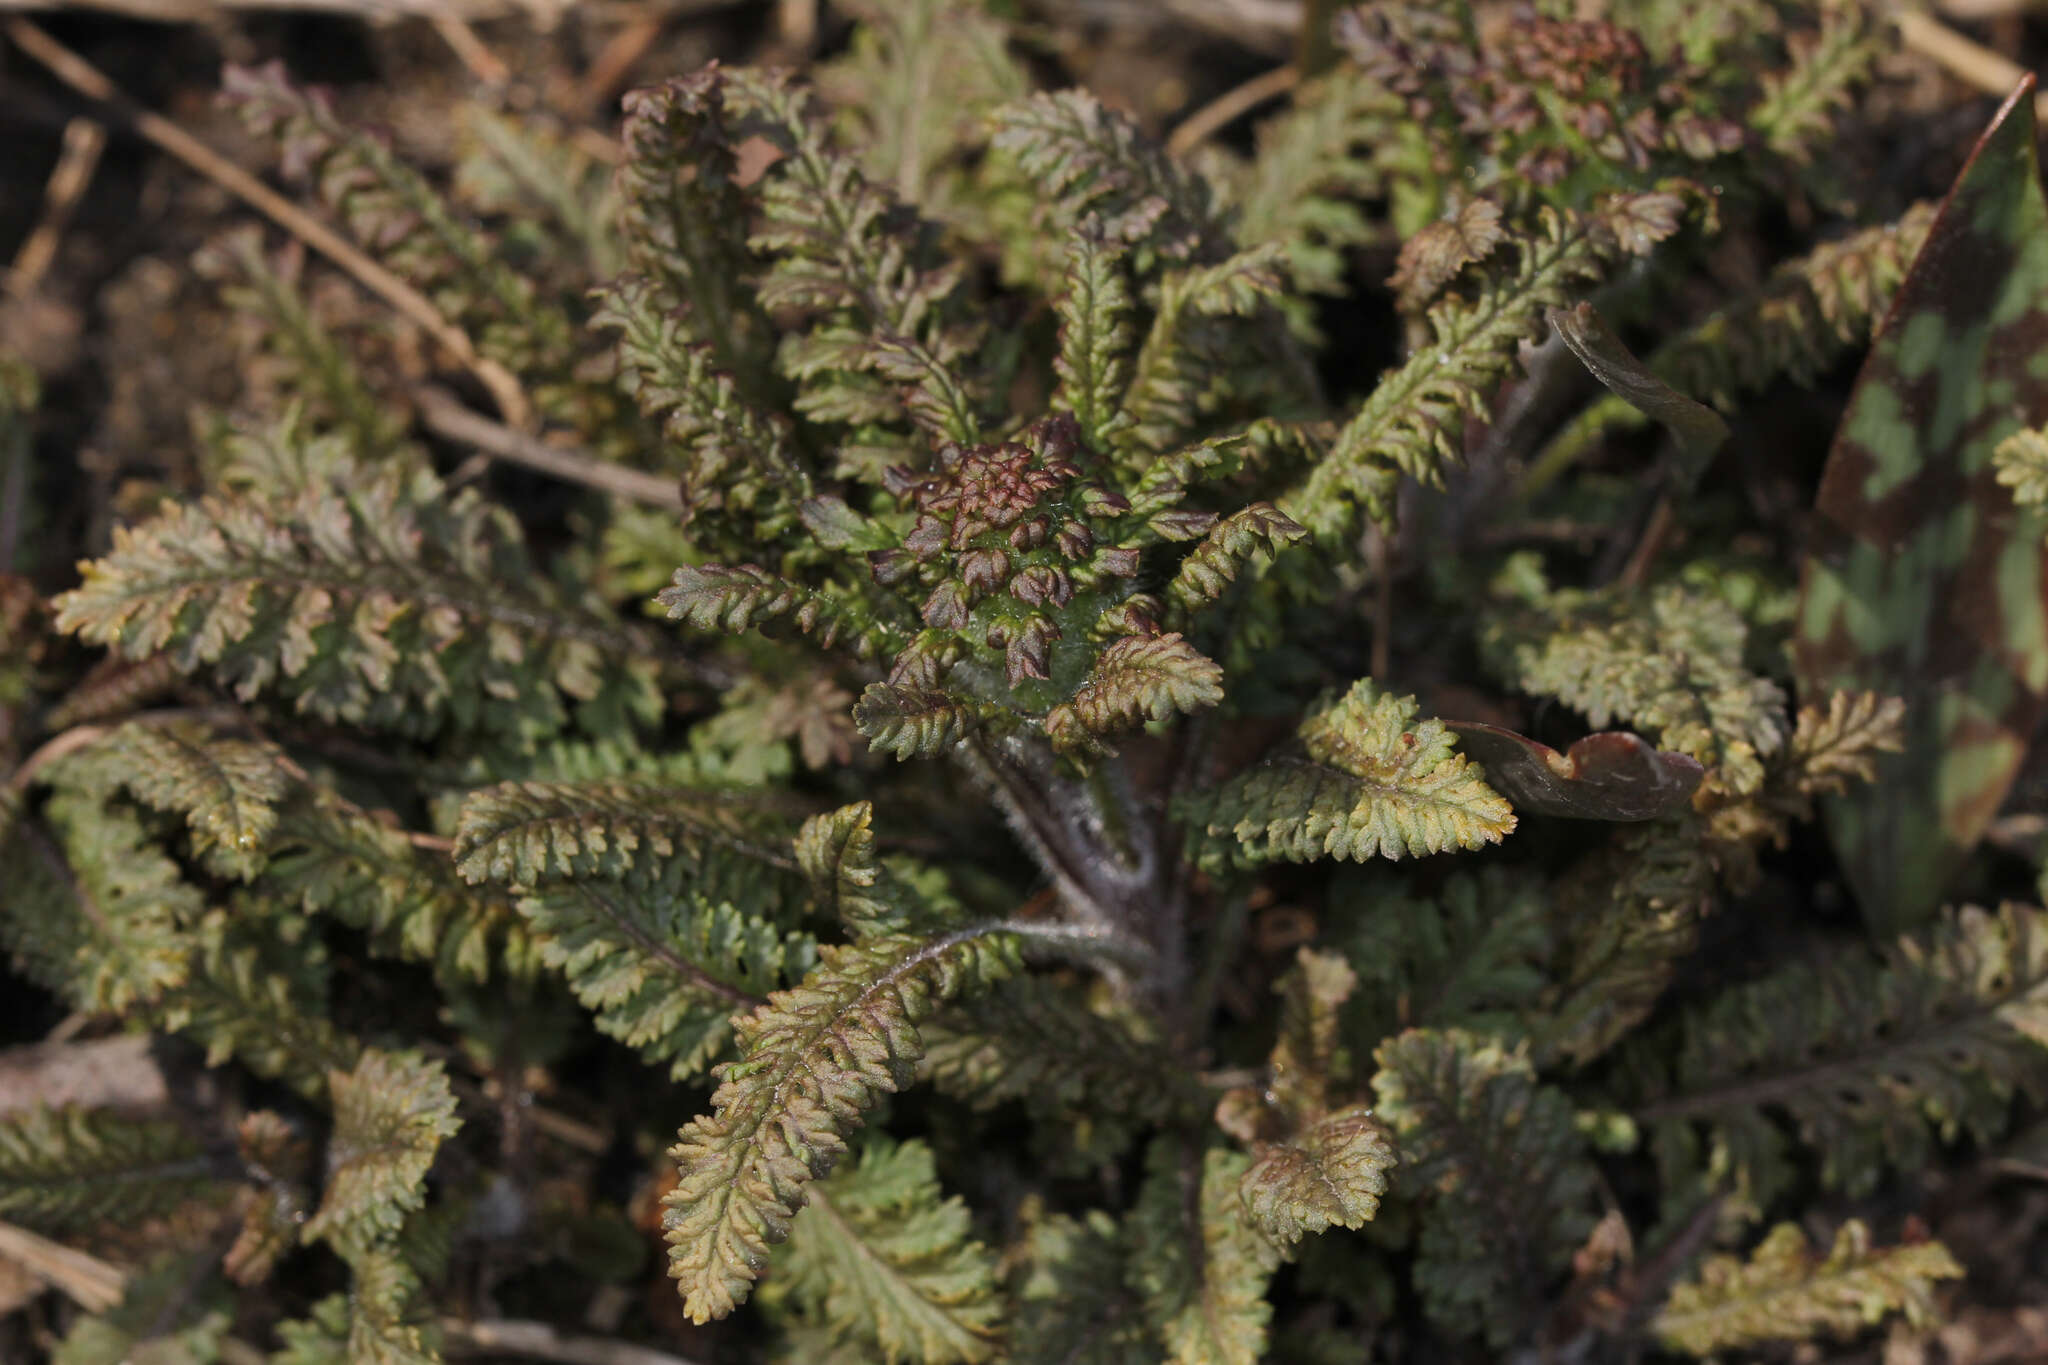 Image of Canadian lousewort